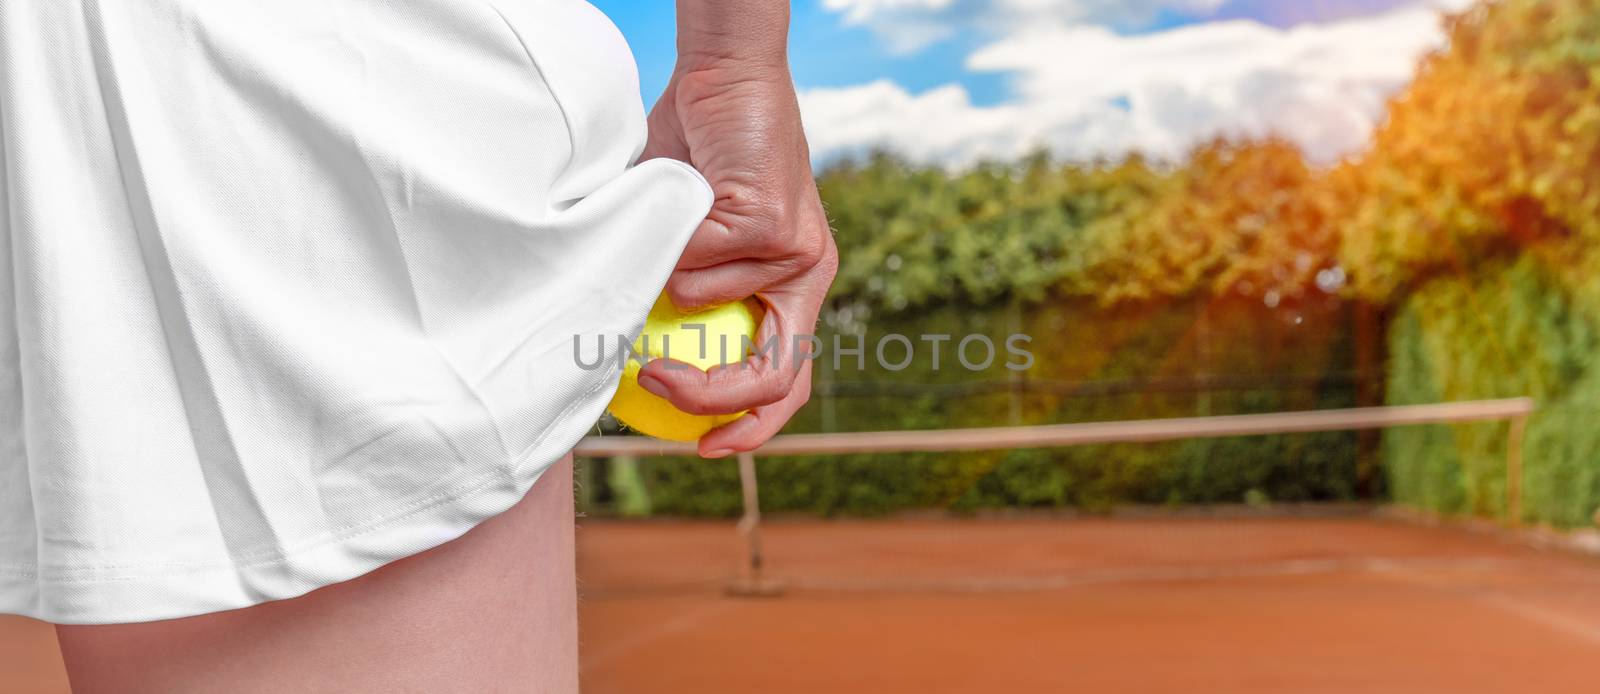 tennis ball in a womans hand in a skirt on a tennis court. preparation for serving a balloon in tennis. banner with copy space by Edophoto